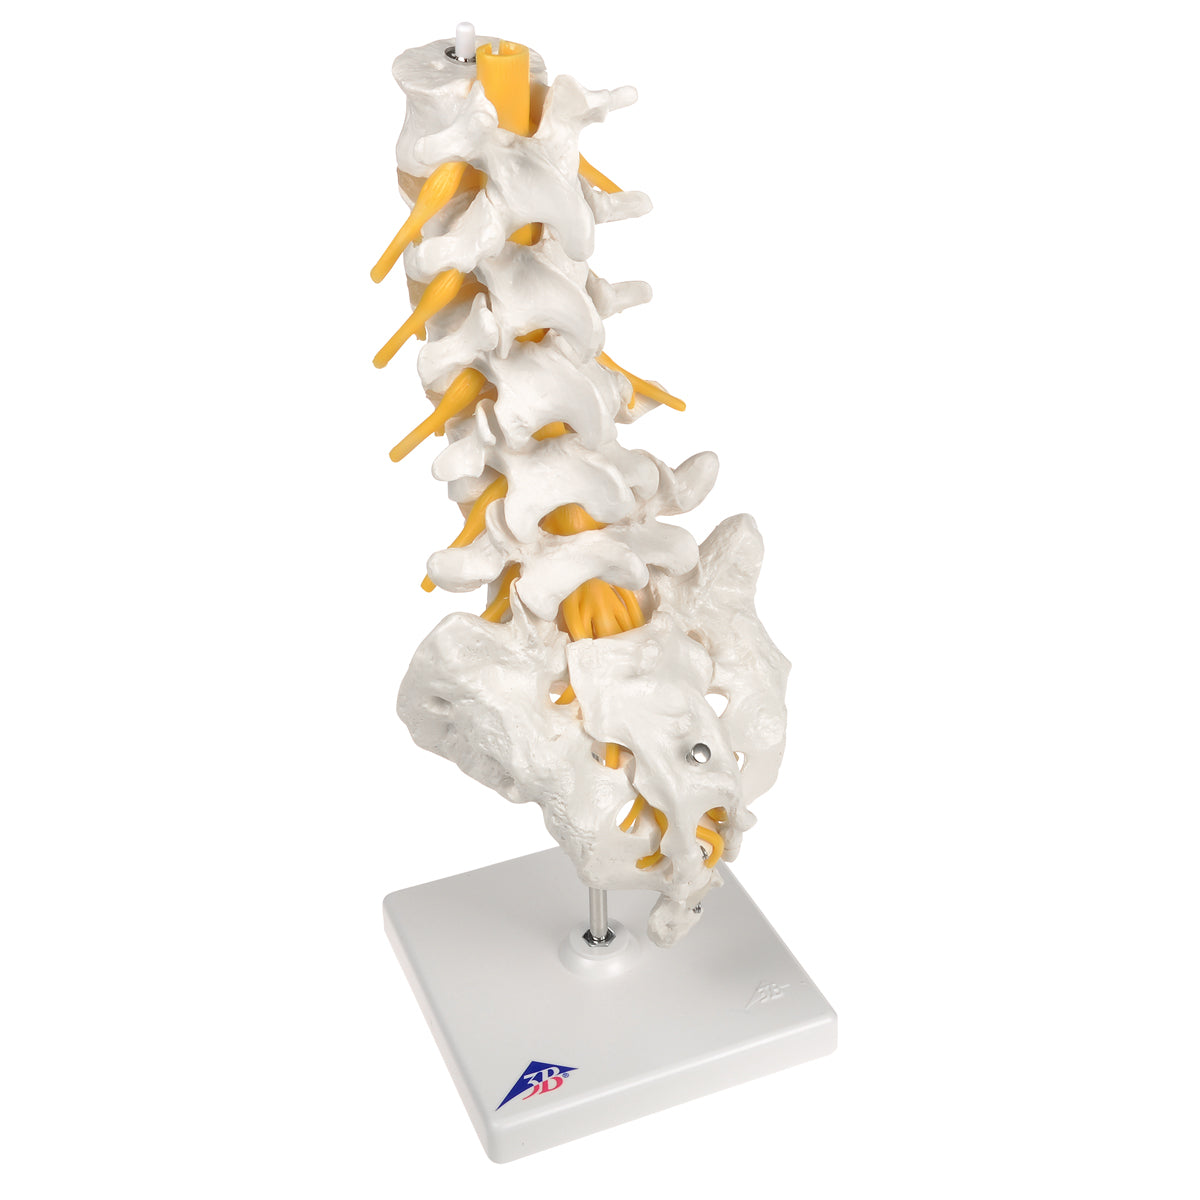 Flexible model of the lower back, sacrum and coccyx with nerves